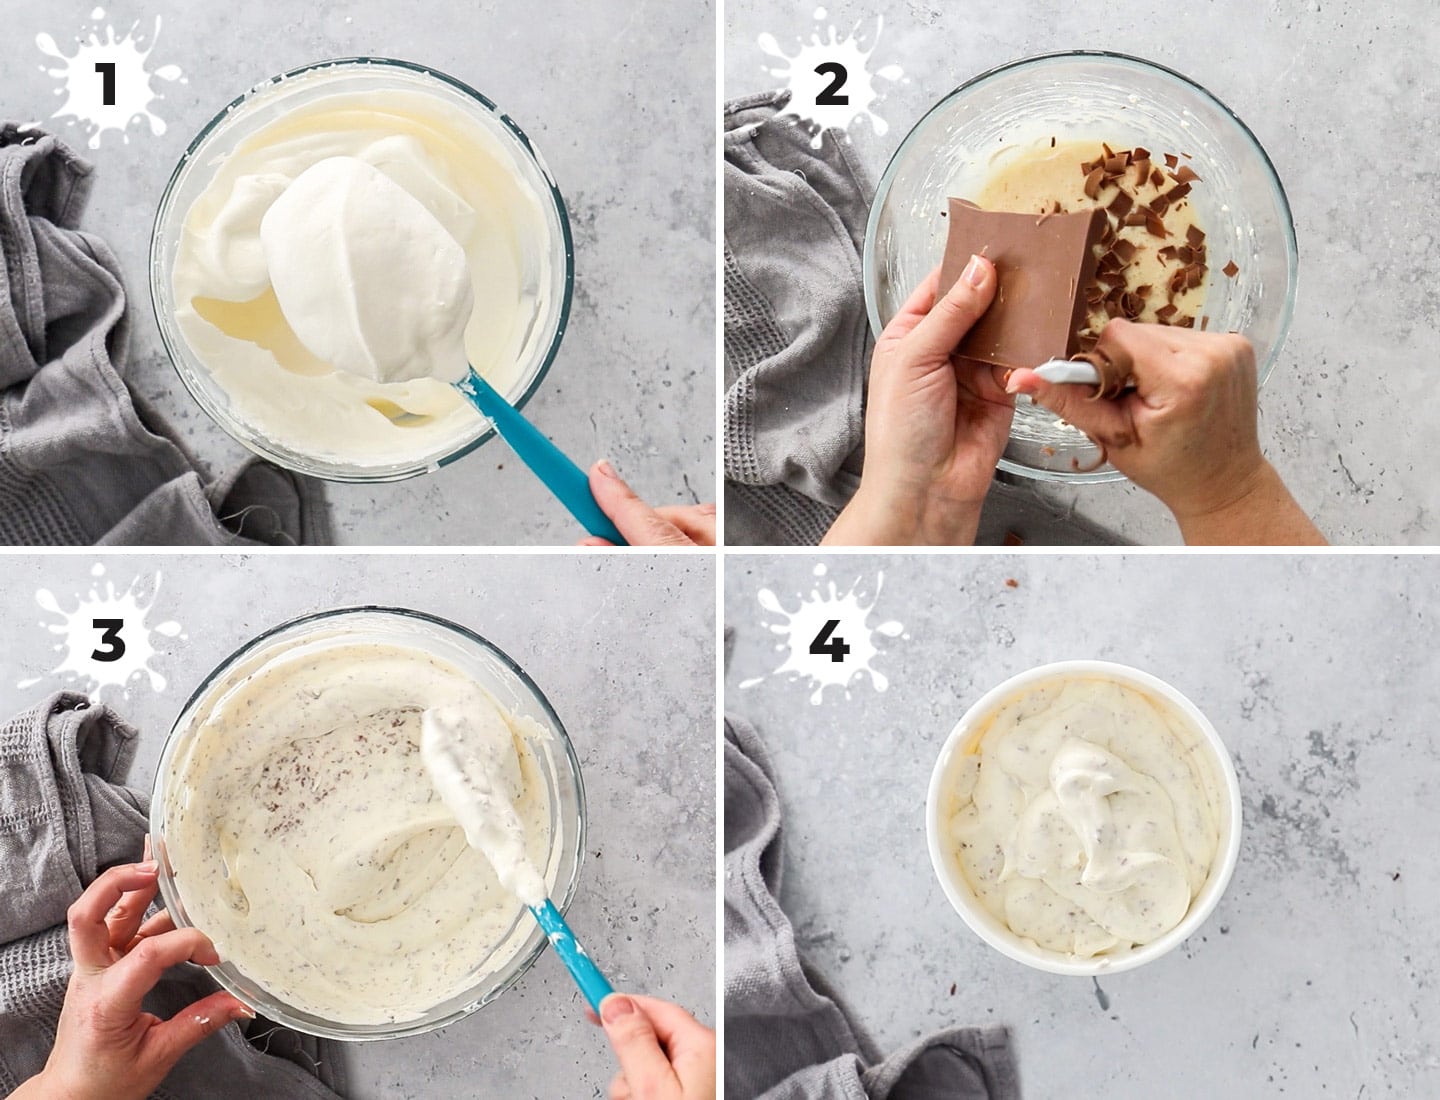 A collage of 4 images showing how to make chocolate chip ice cream.